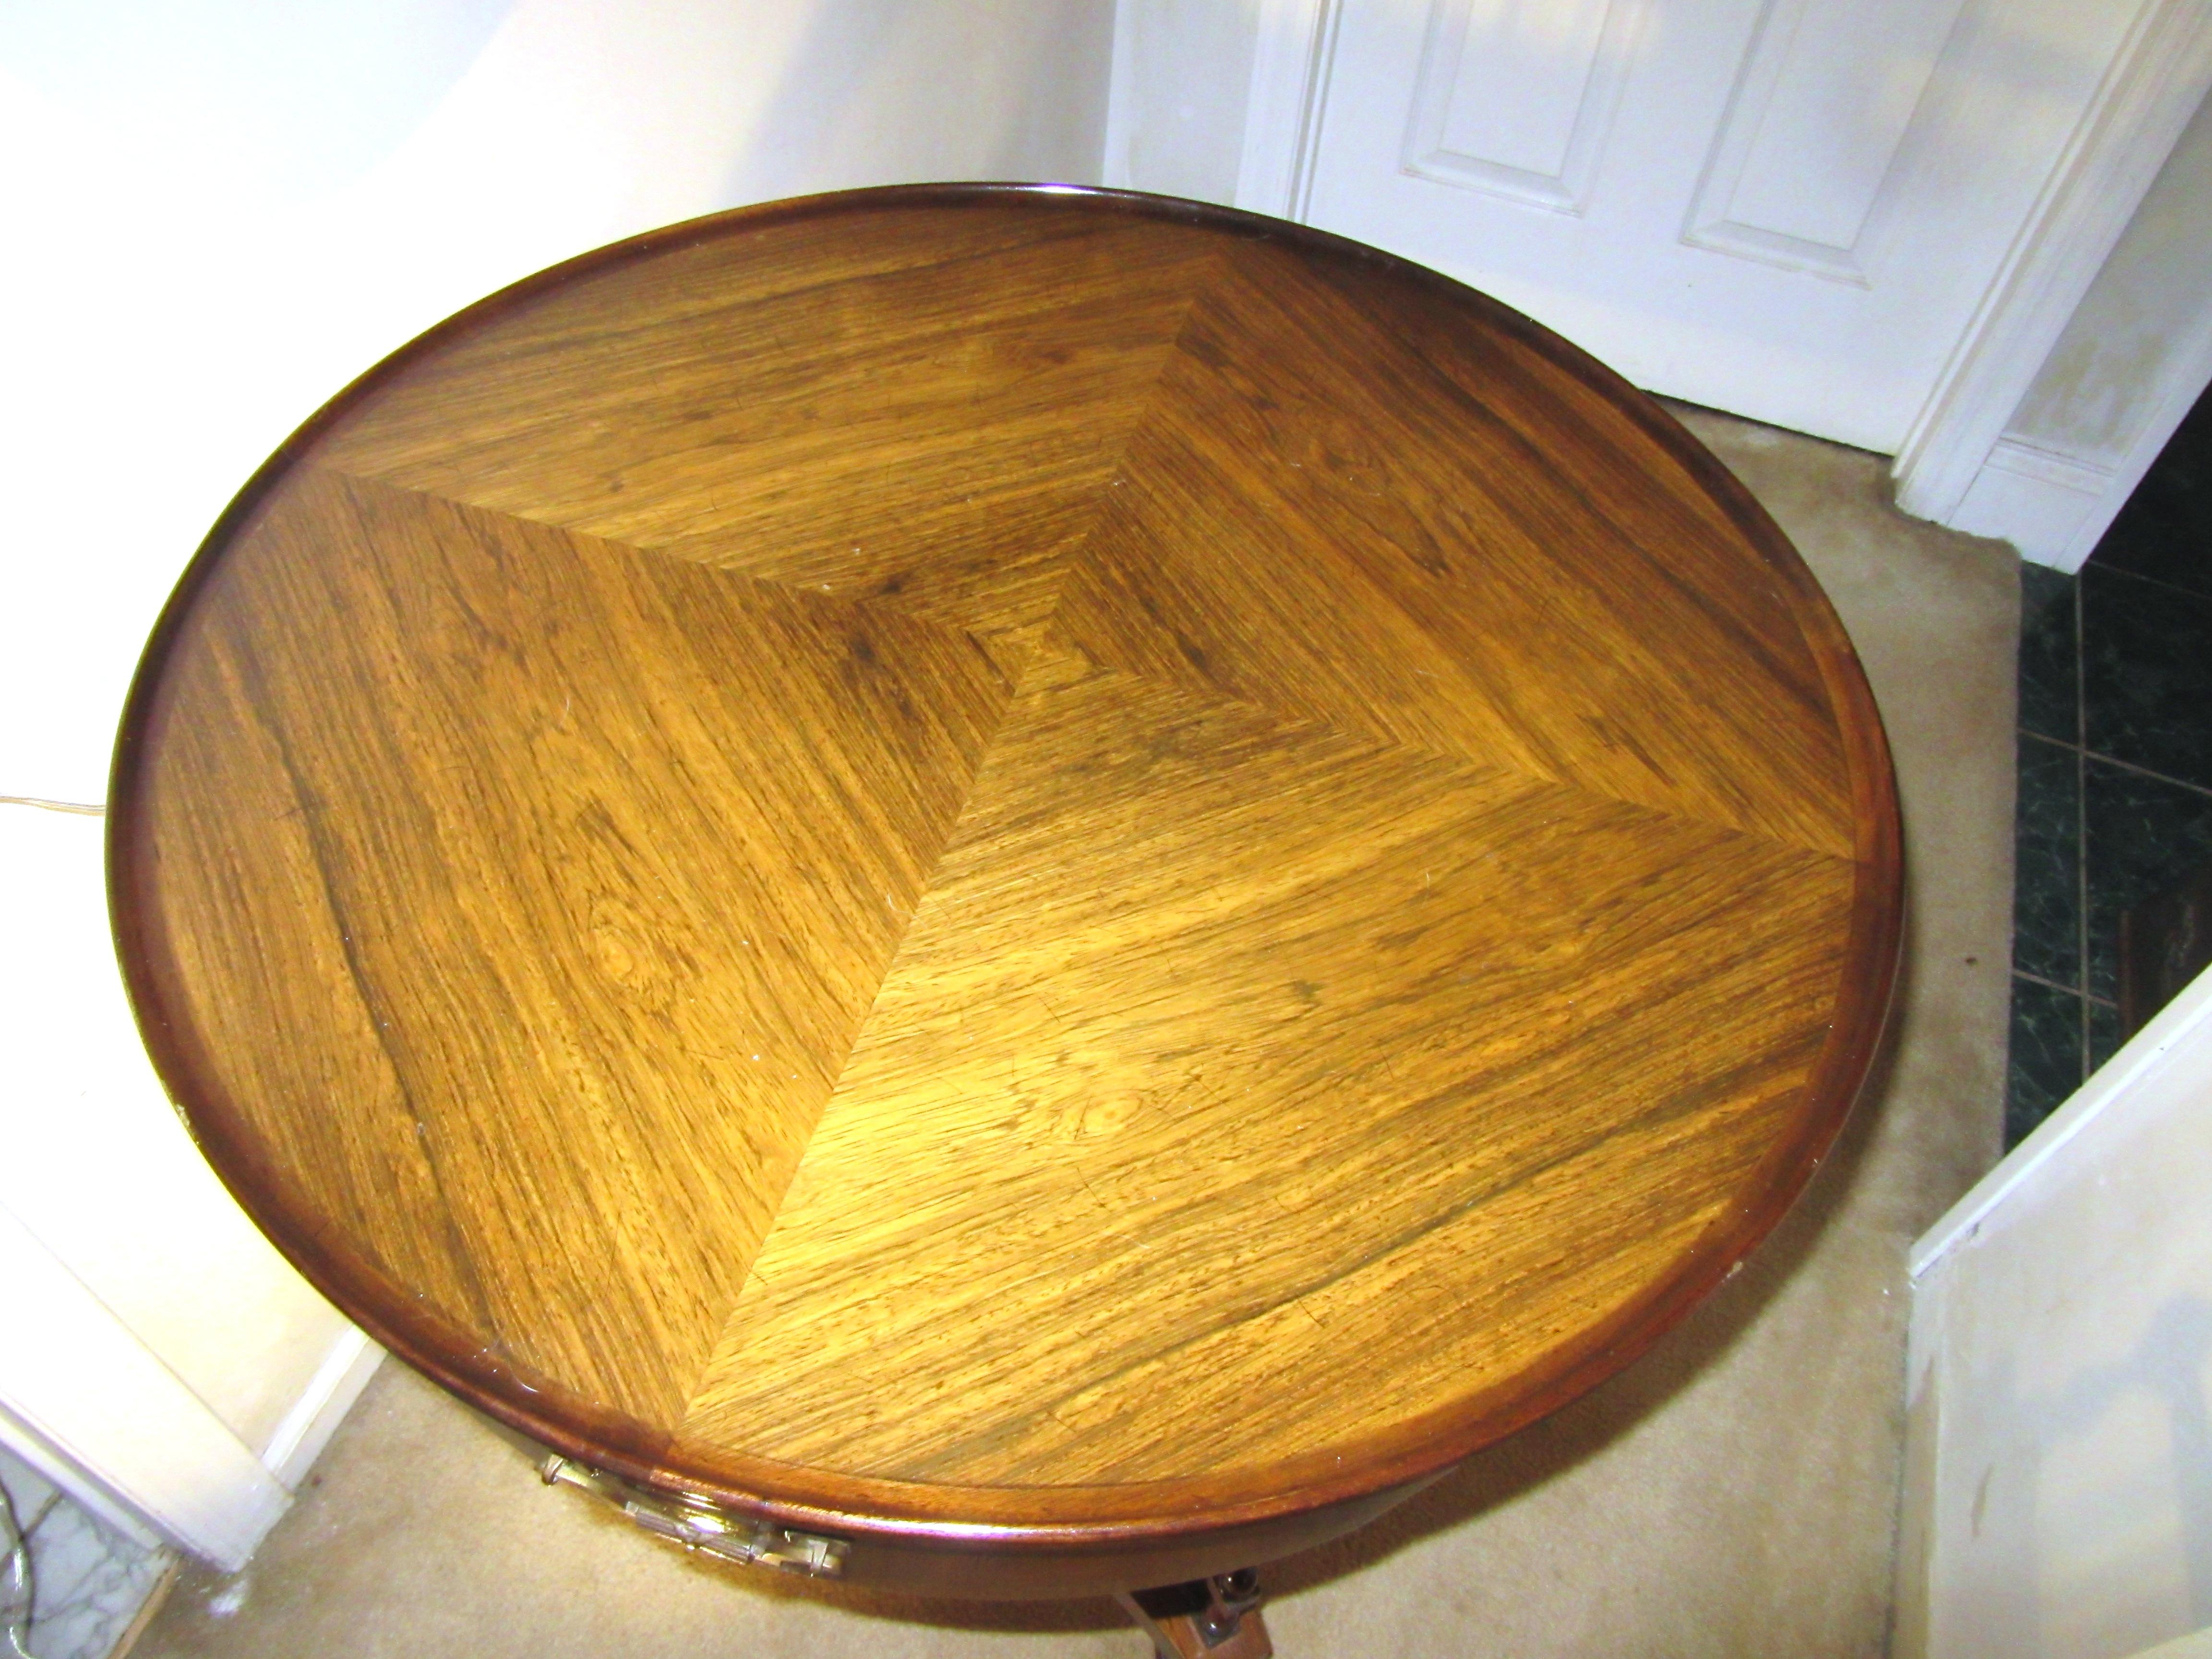 Art Deco round rosewood drum table made during the 1940s by Grosfeld House. The table has a gallery on the bottom of the pedestal and bookmatched rosewood. Grosfeld House label in the center drawer. In great vintage condition with some scratches on